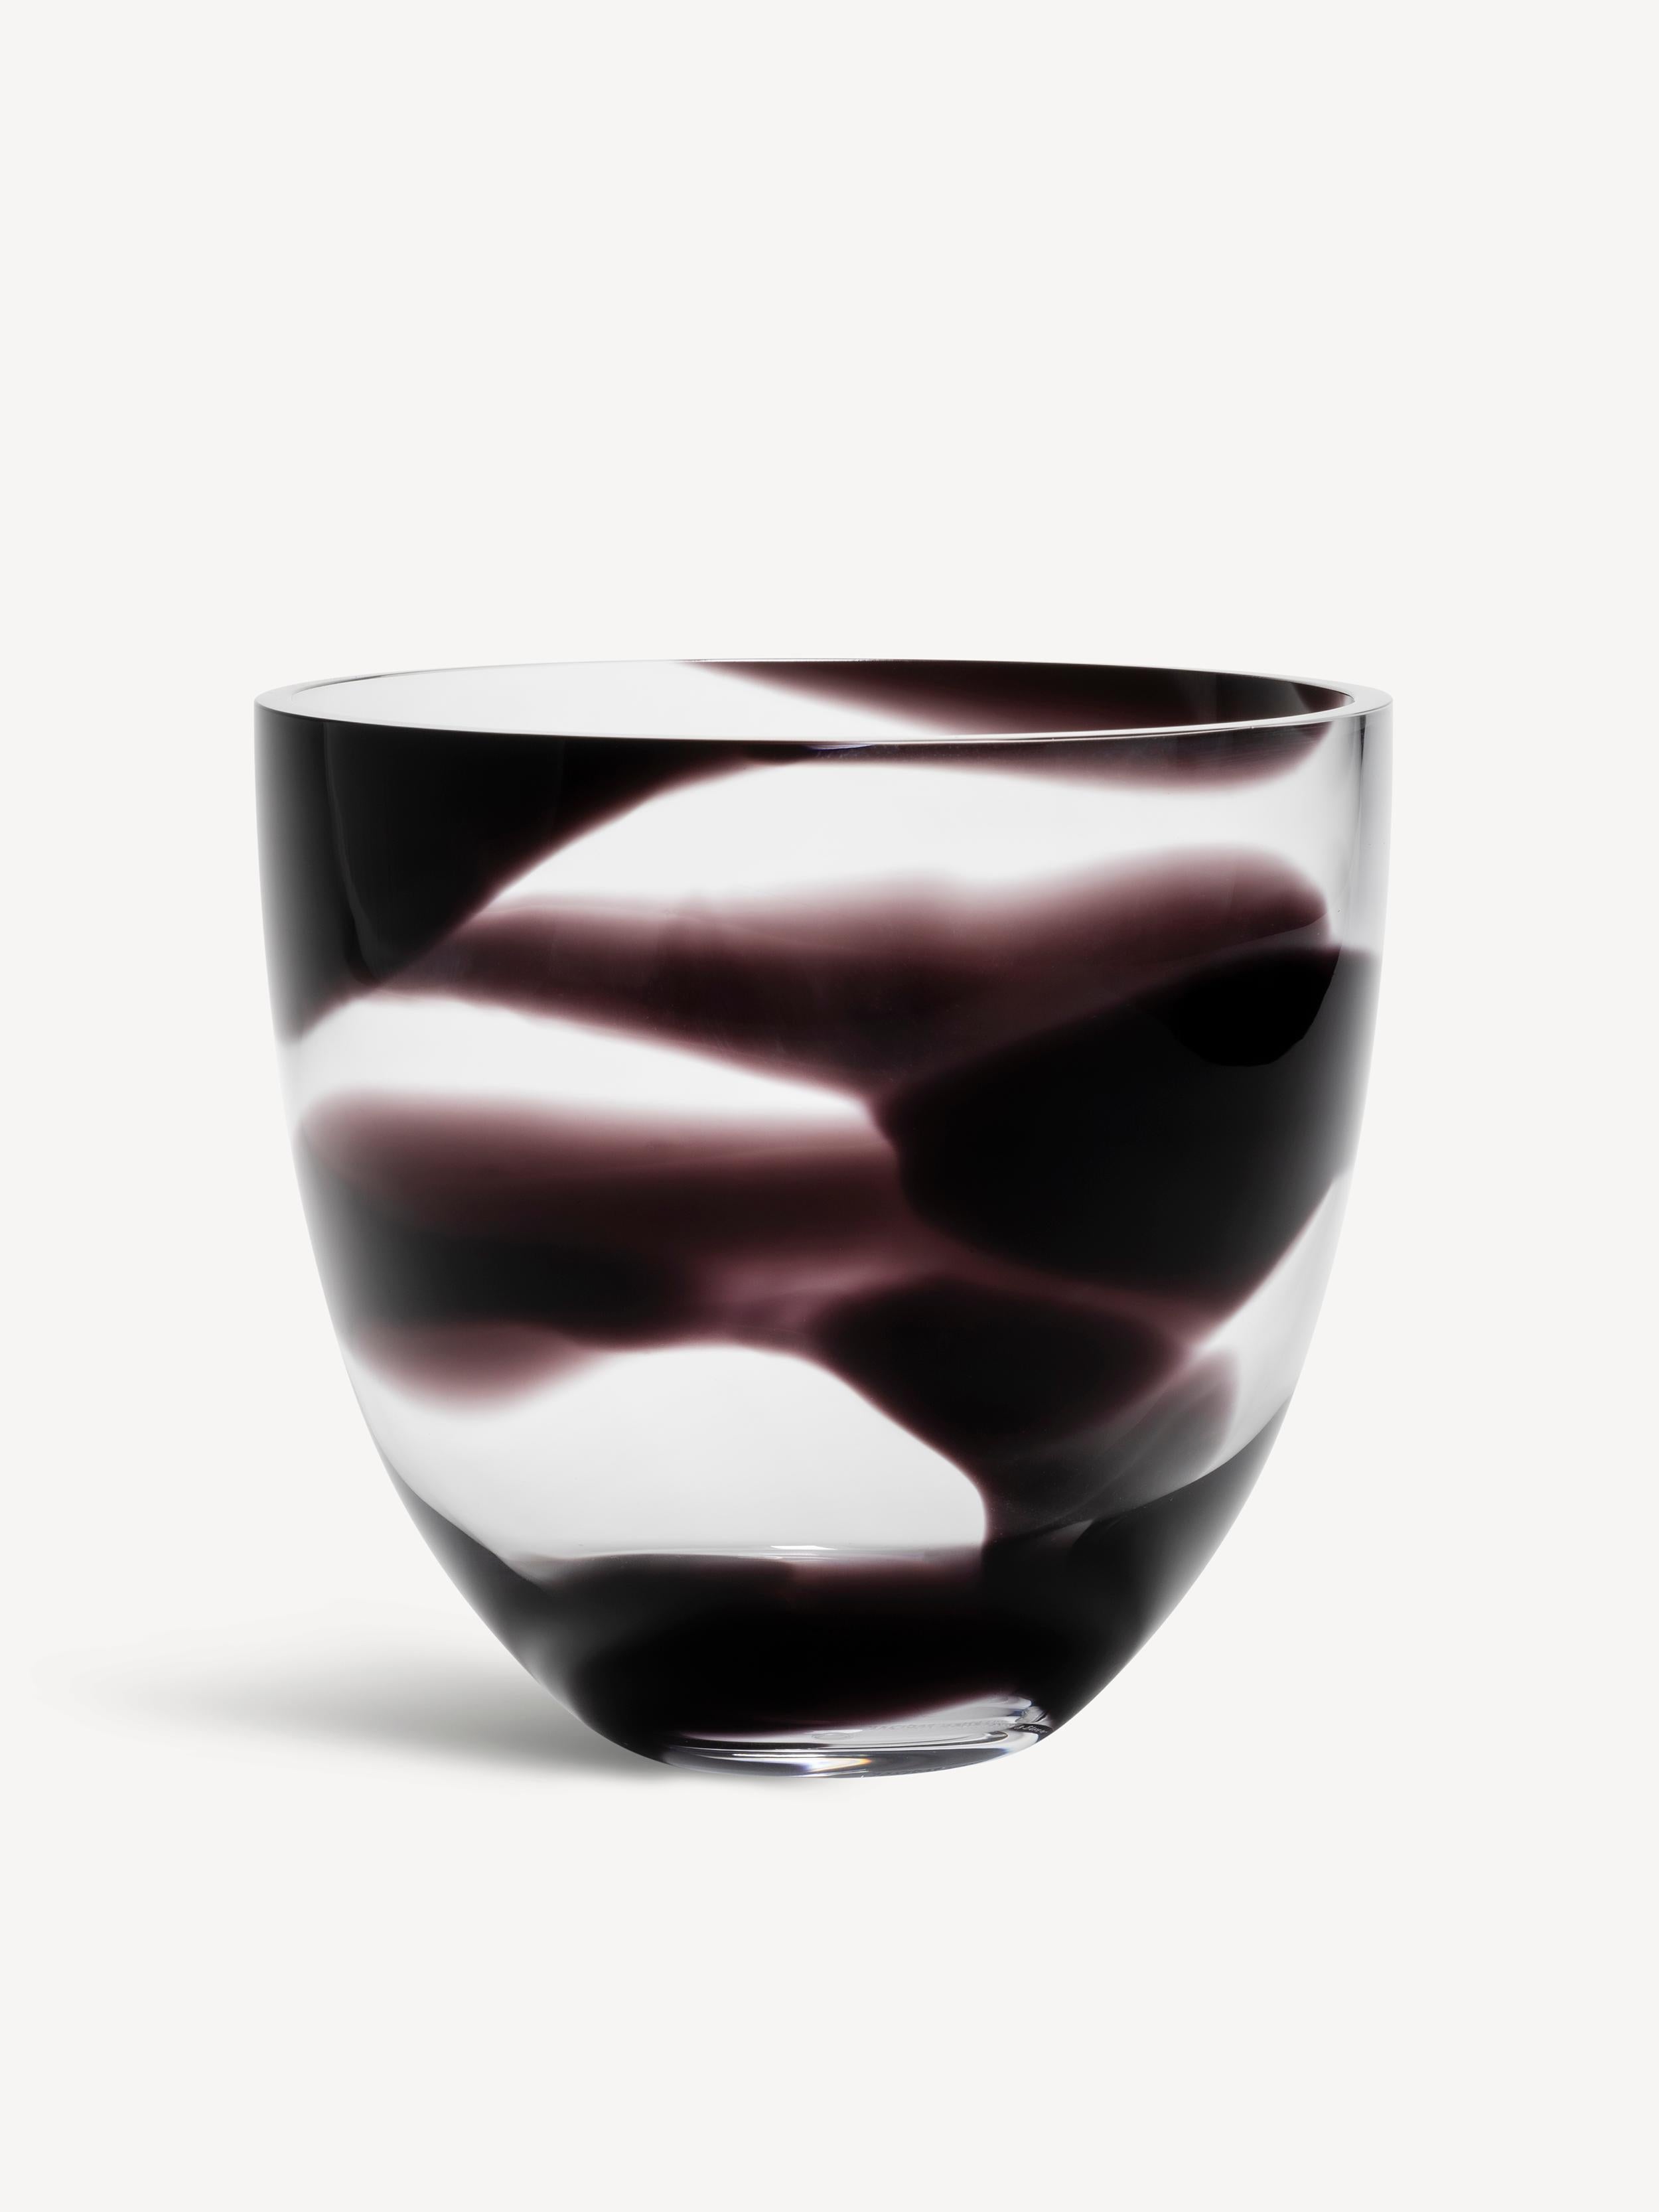 The Non Stop bowl has a wrap-around black pattern that results in a graphic, vibrant finish. Let’s not ever stop loving great design. The bowl is mouth-blown at Kosta Glassworks in Sweden. Design by Anna Ehrner. 
